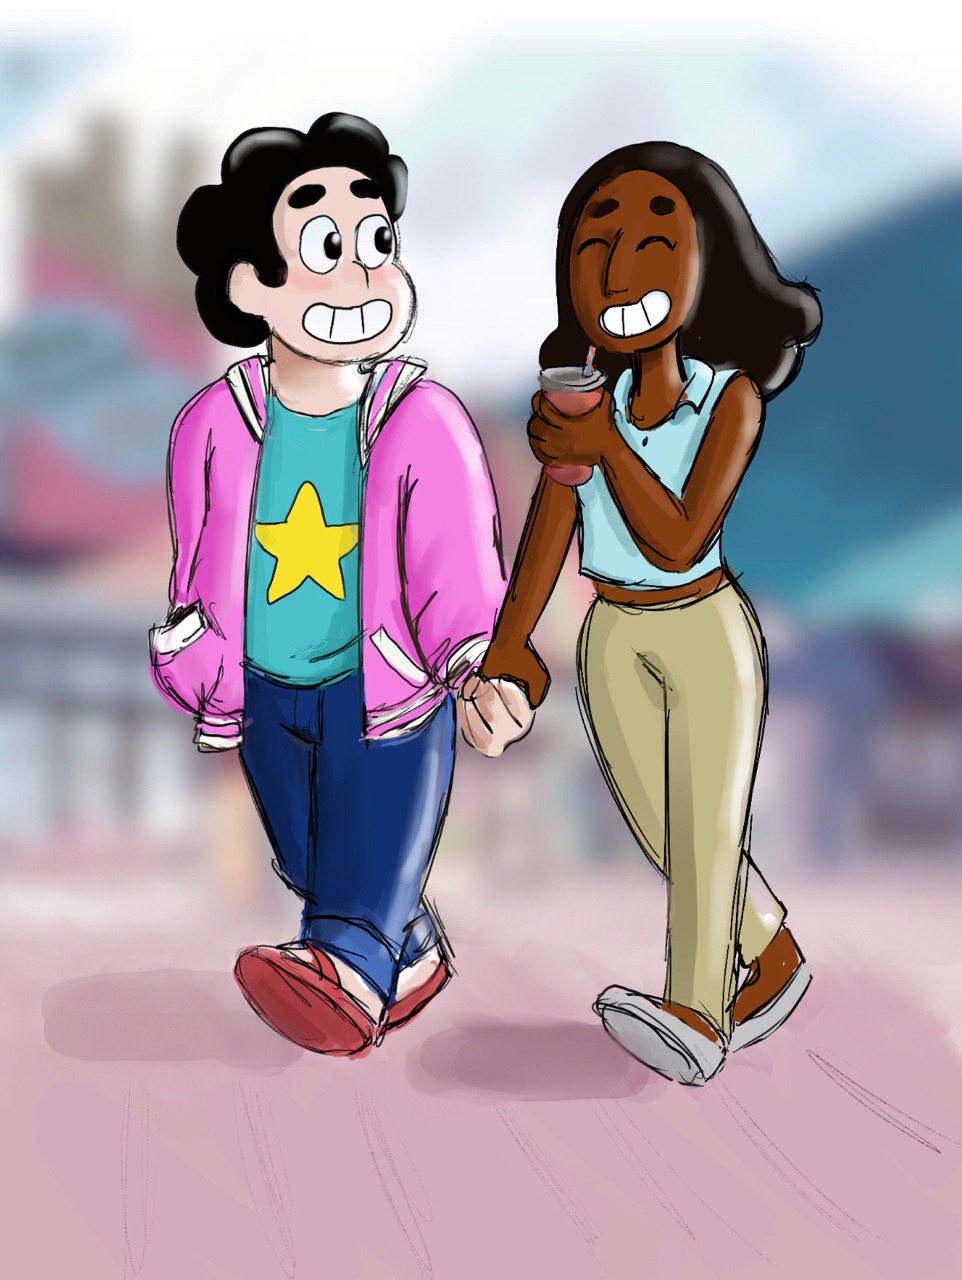 I had to celebrate Steven’s new character design as well as maYBE THEY’RE DATING NOW???